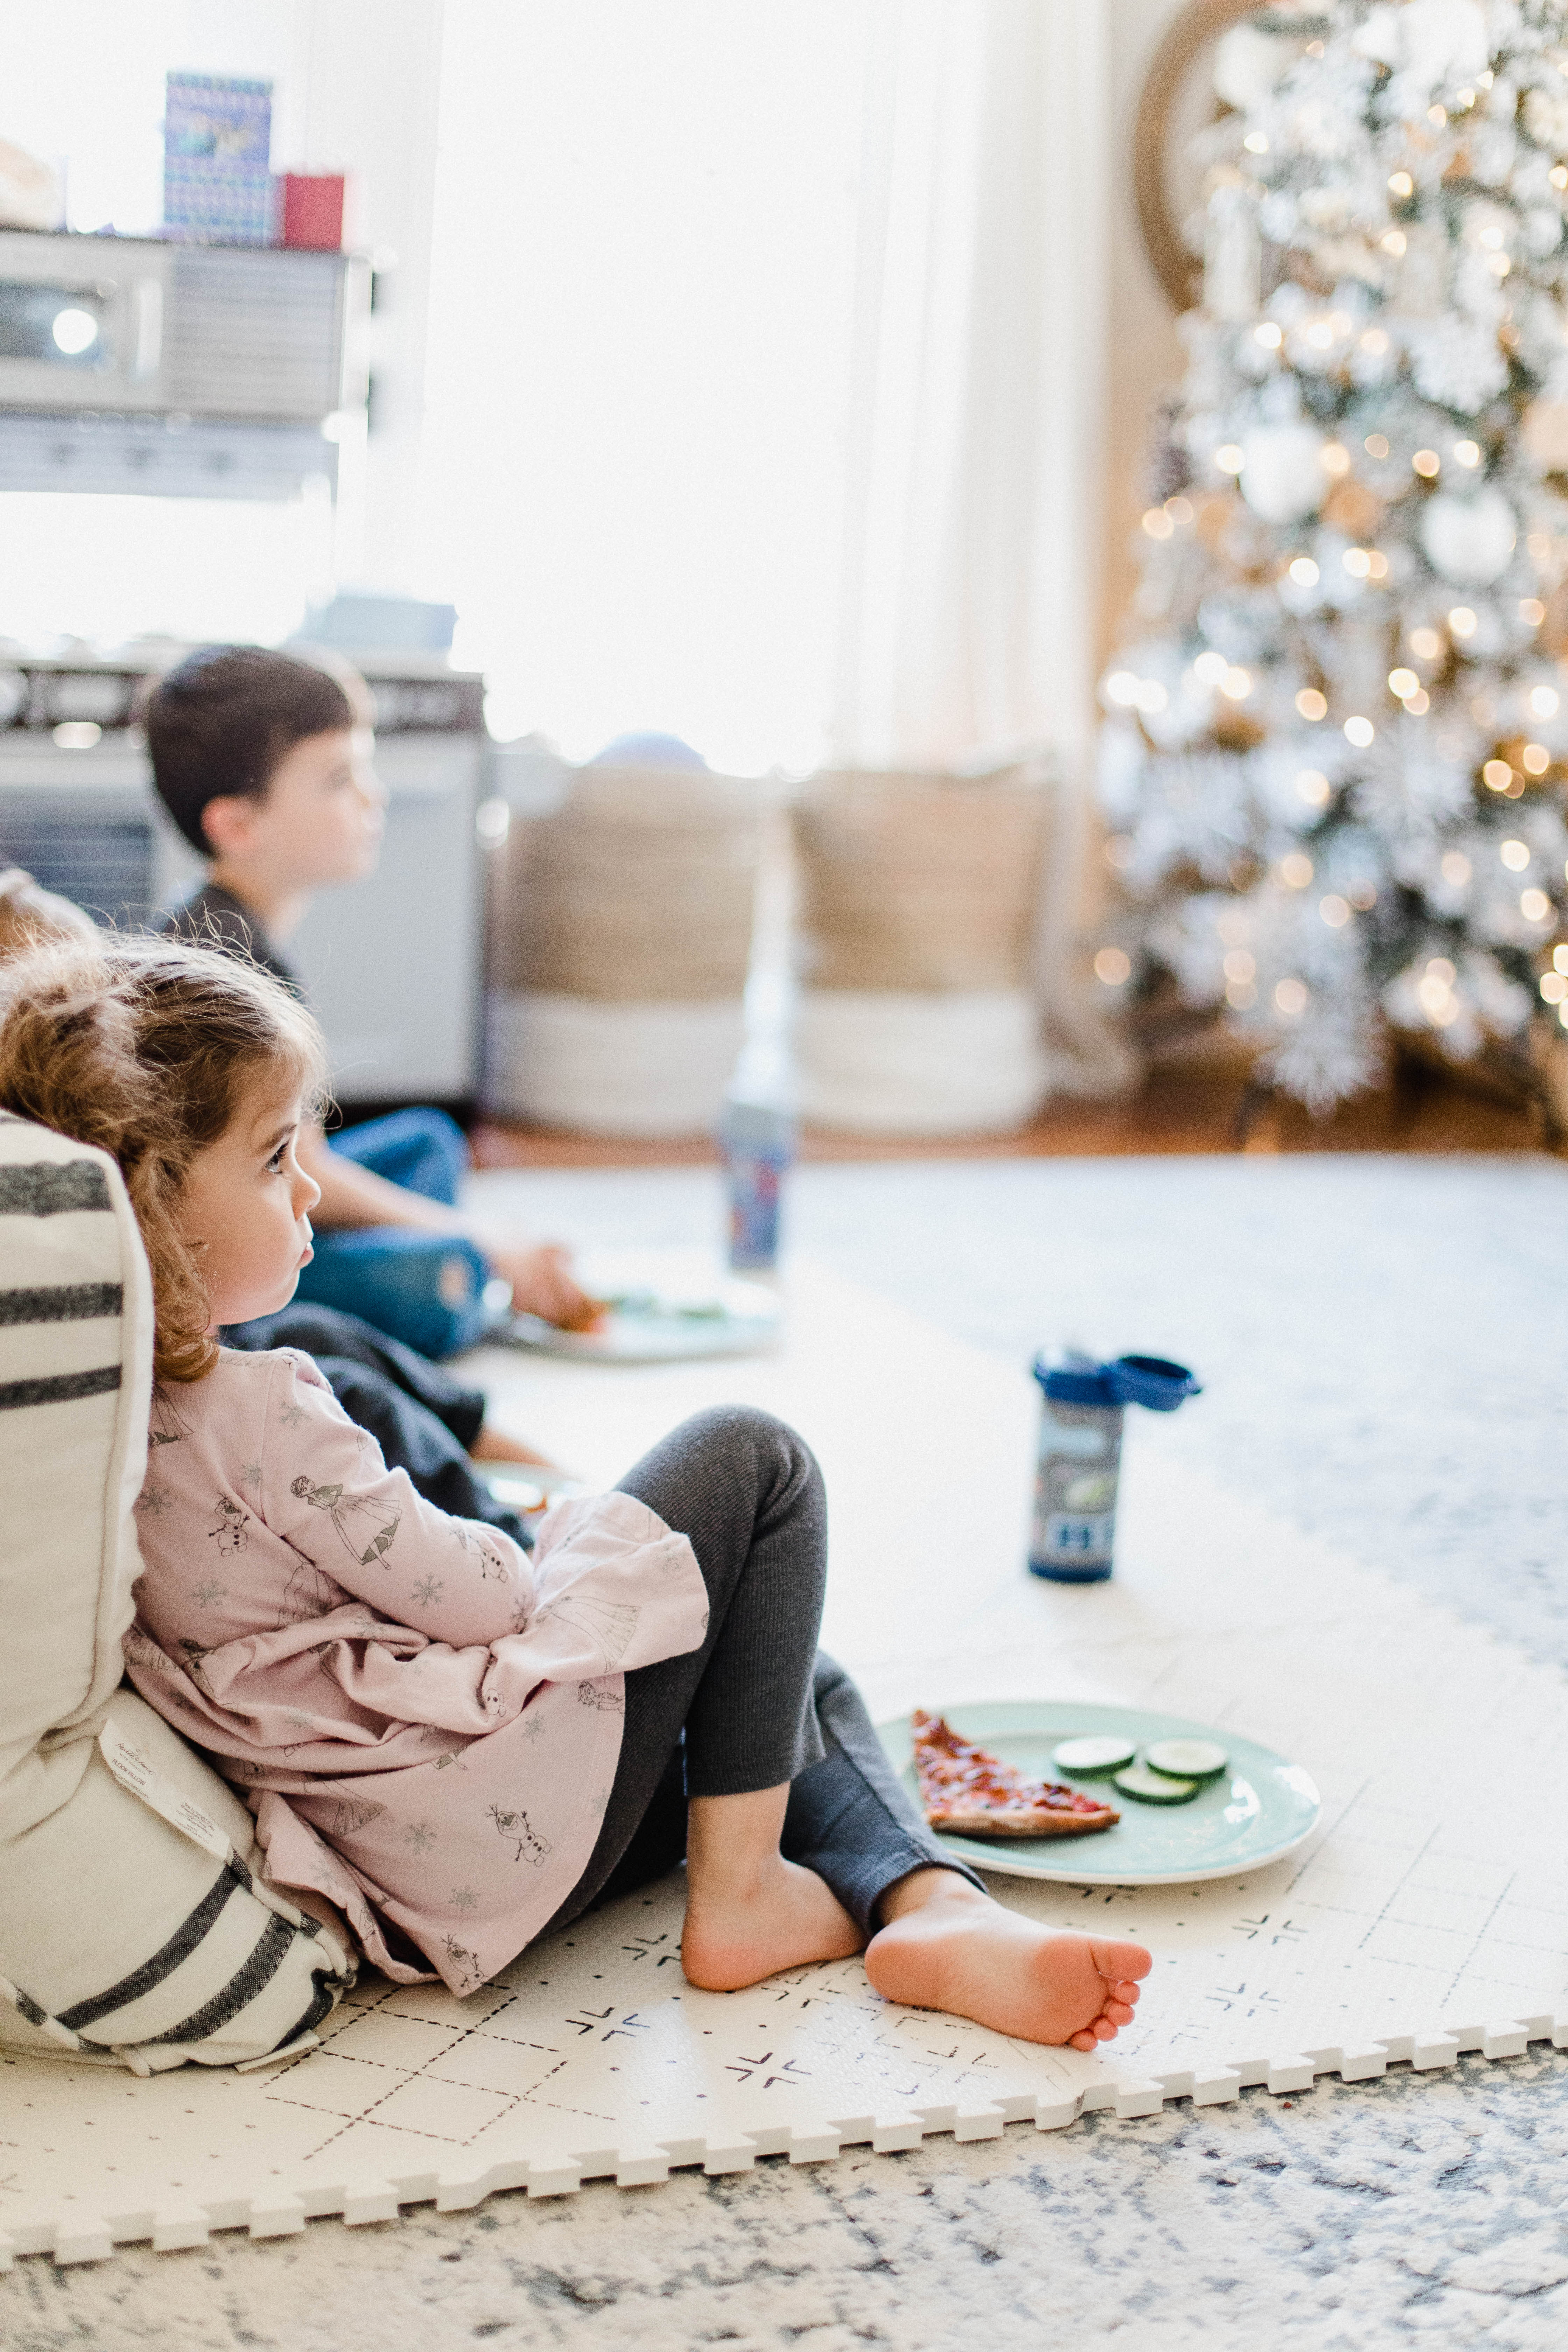 Connecticut life and style blogger Lauren McBride shares her family’s weekly Friday night tradition and how Disney+ plays a part in it!